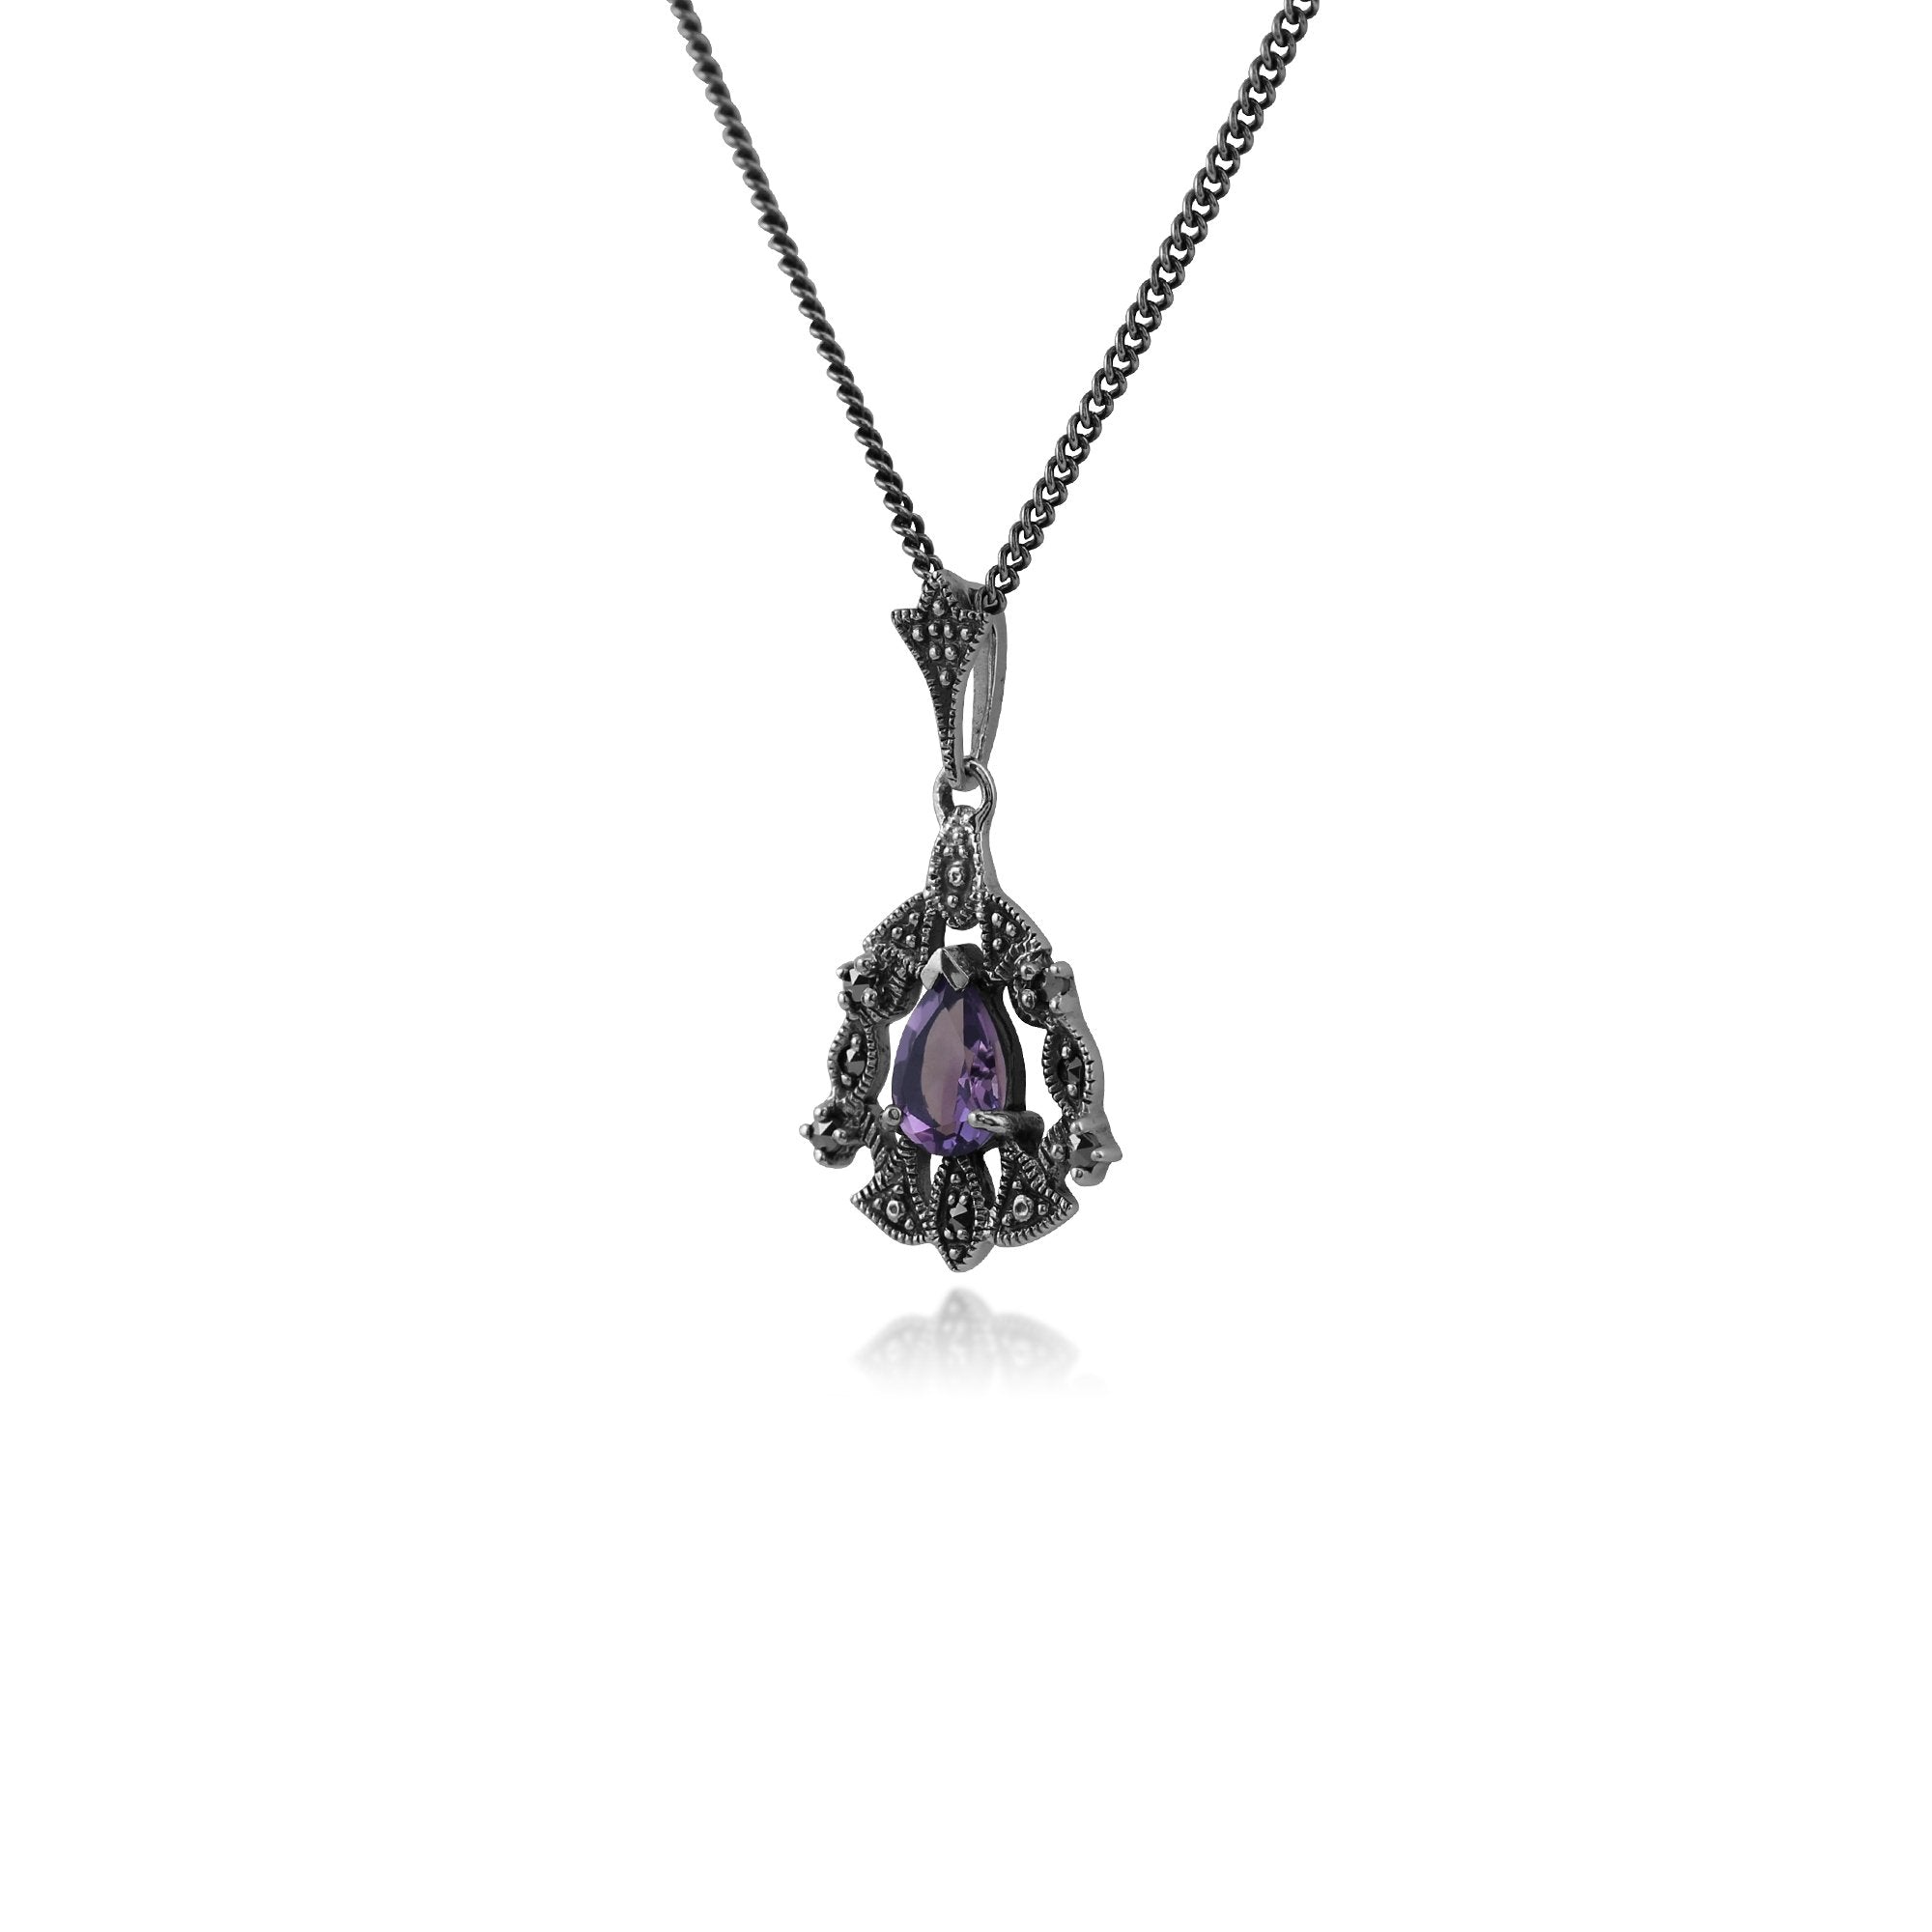 Art Nouveau Style Pear Amethyst & Marcasite Garland Necklace in 925 Sterling Silver